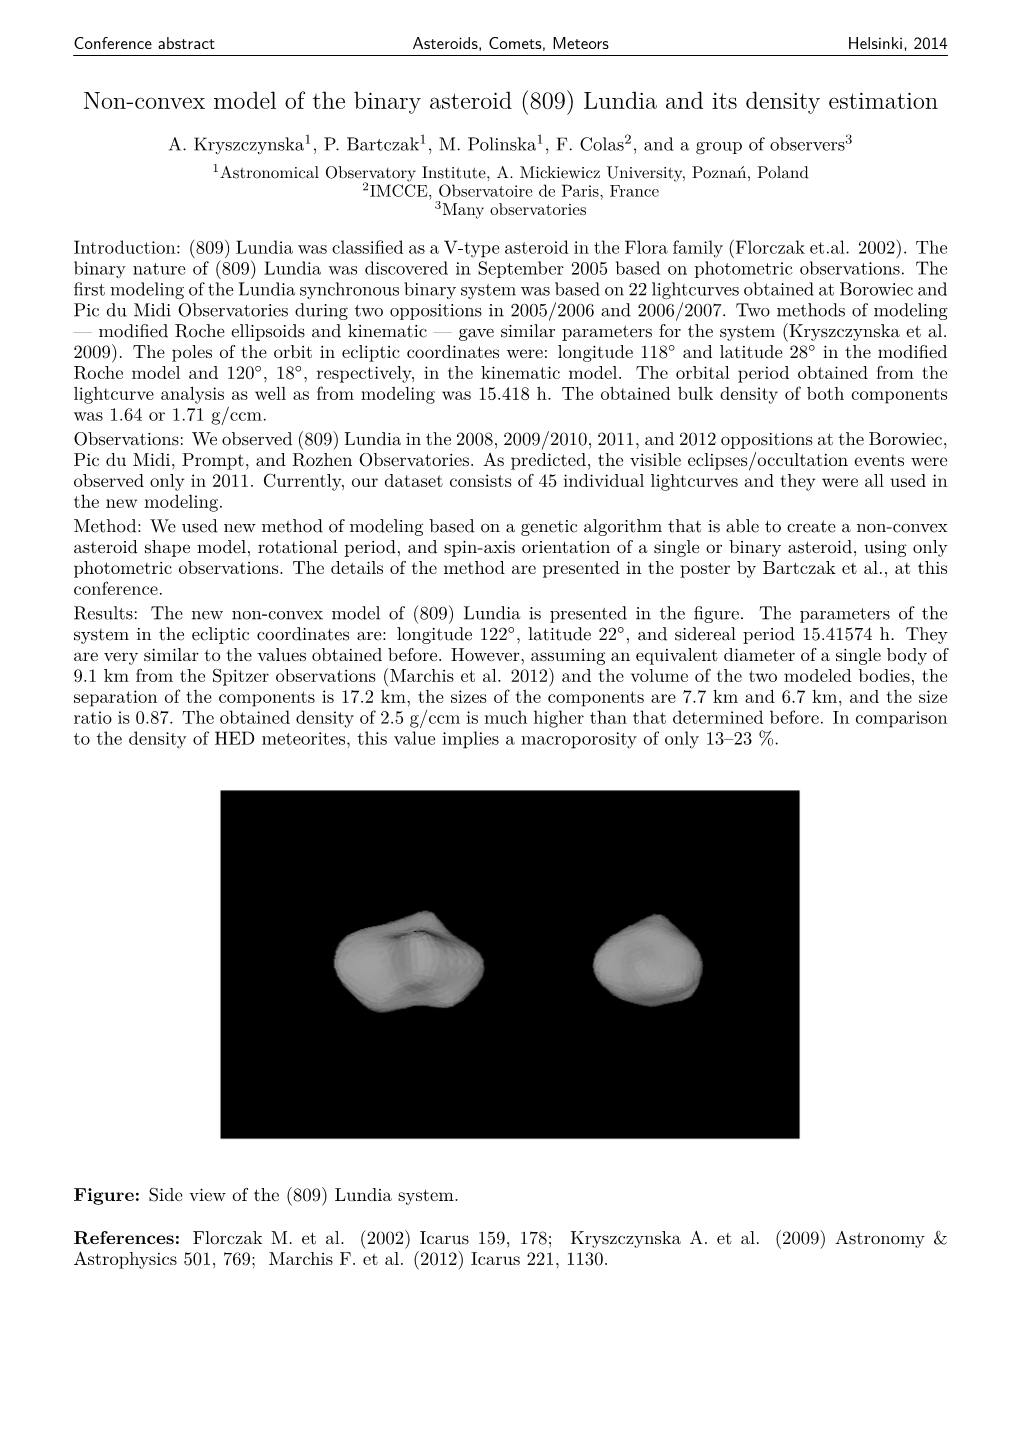 Non-Convex Model of the Binary Asteroid (809) Lundia and Its Density Estimation